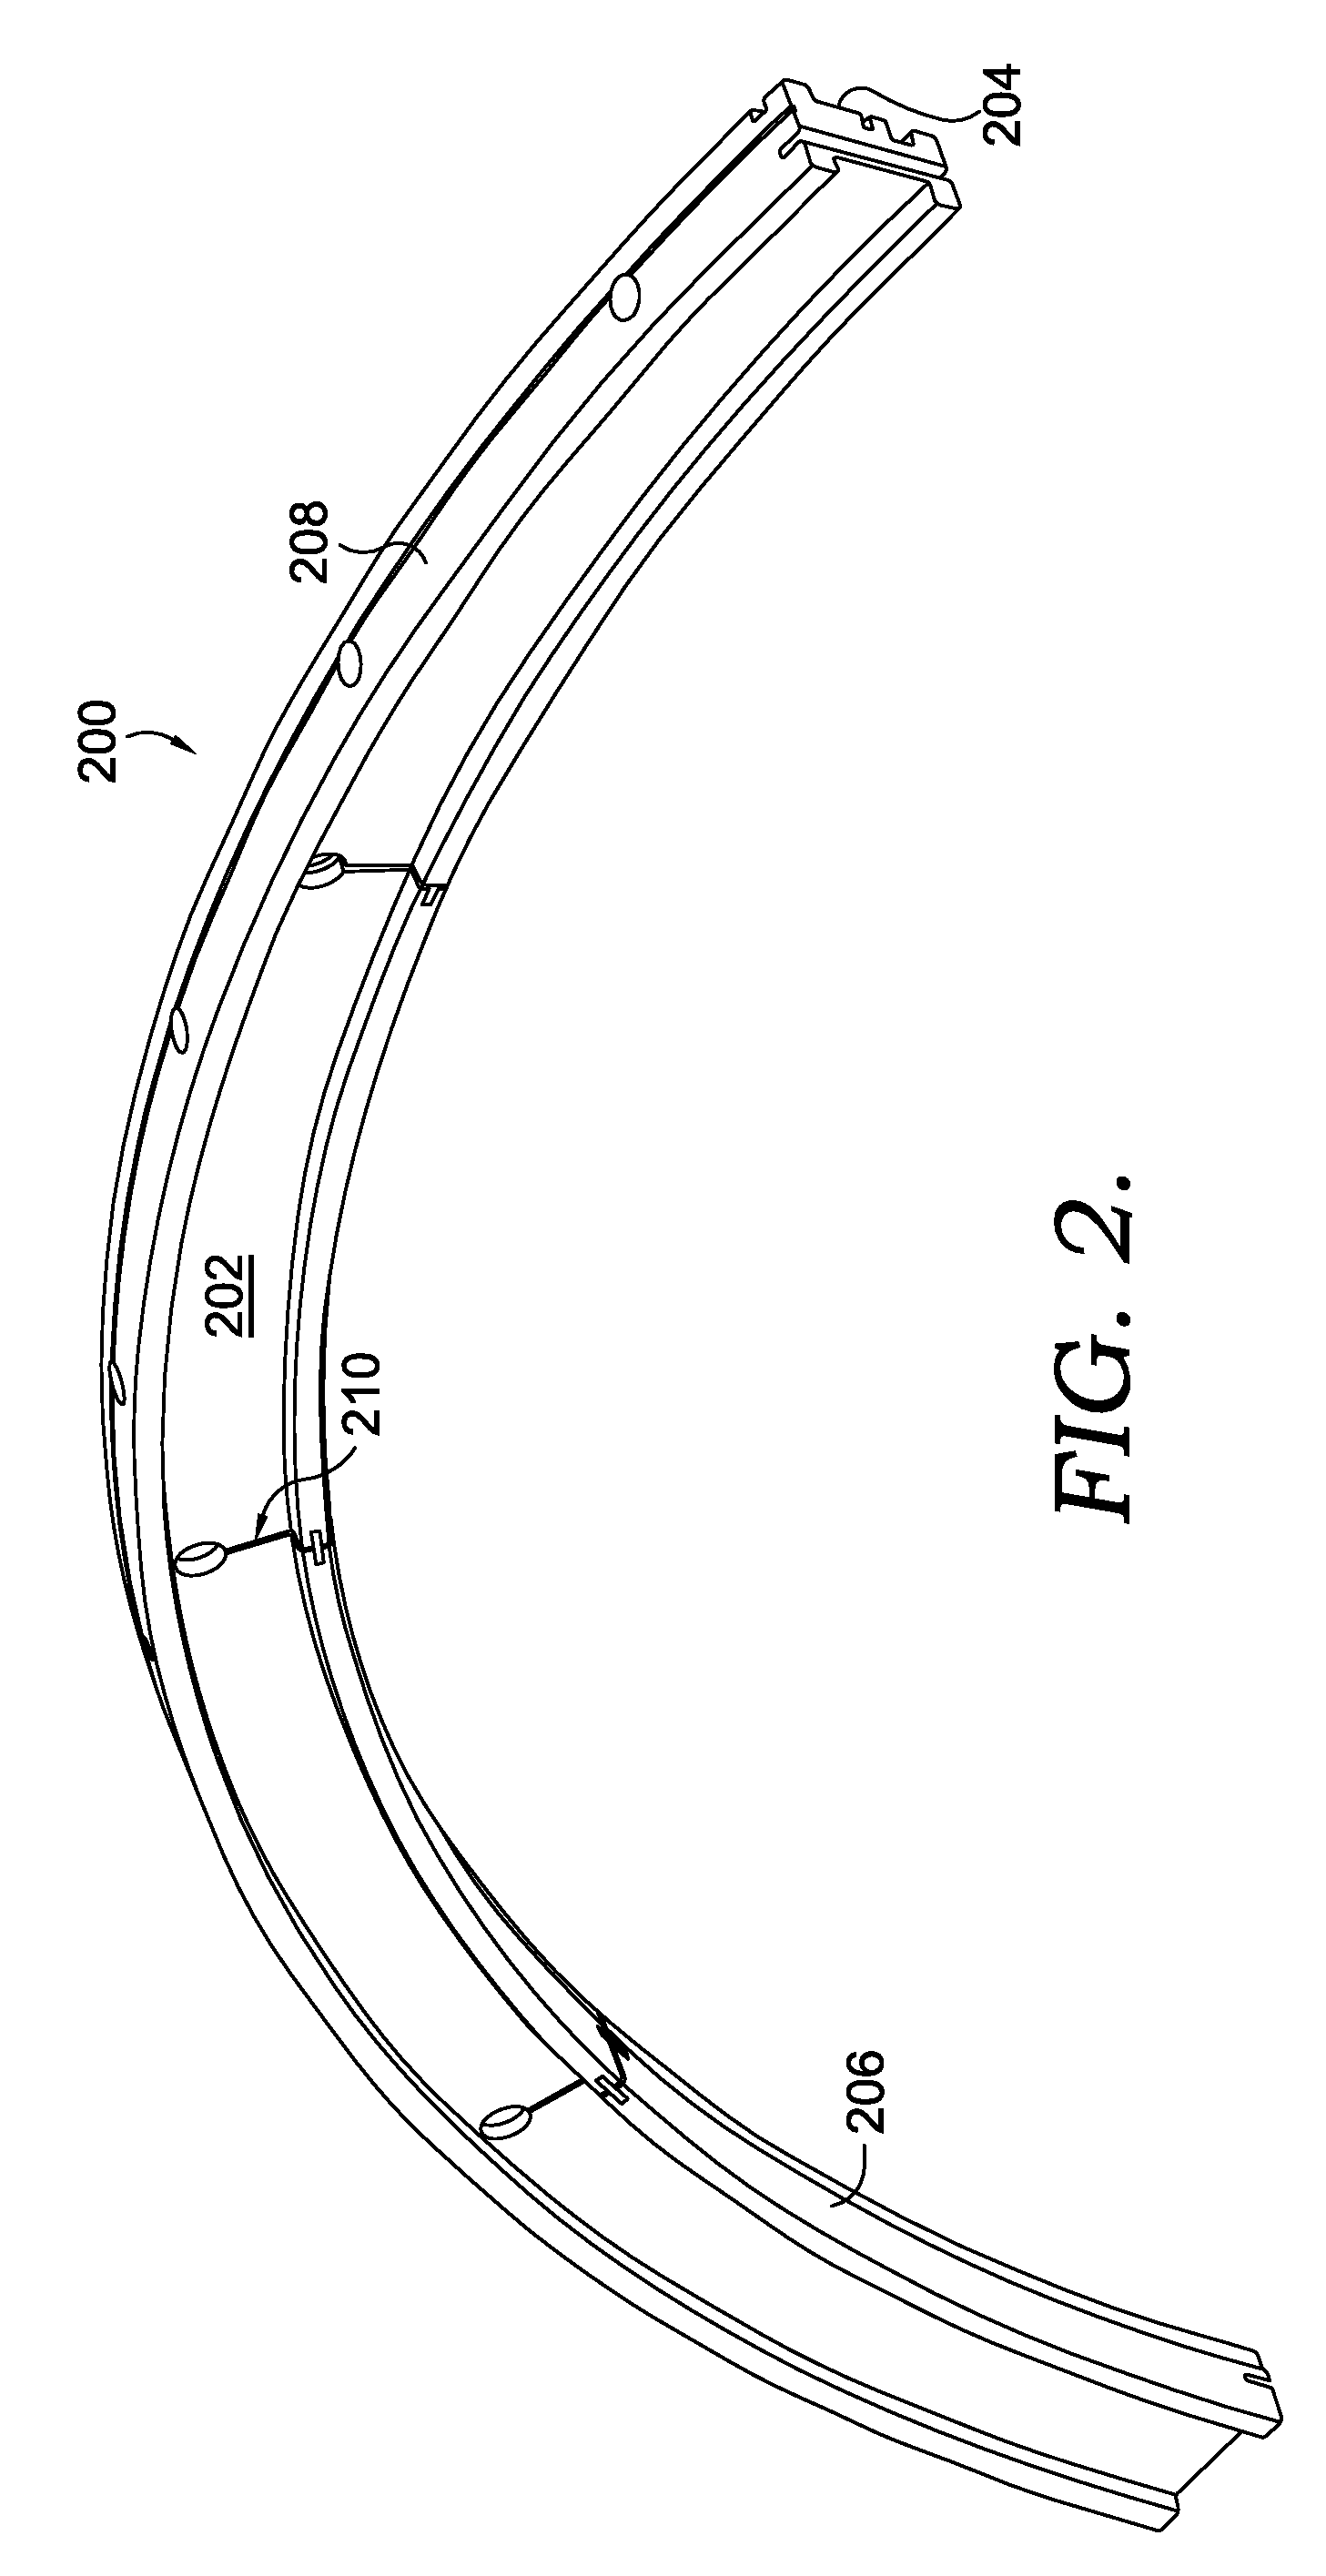 Turbine Static Structure for Reduced Leakage Air